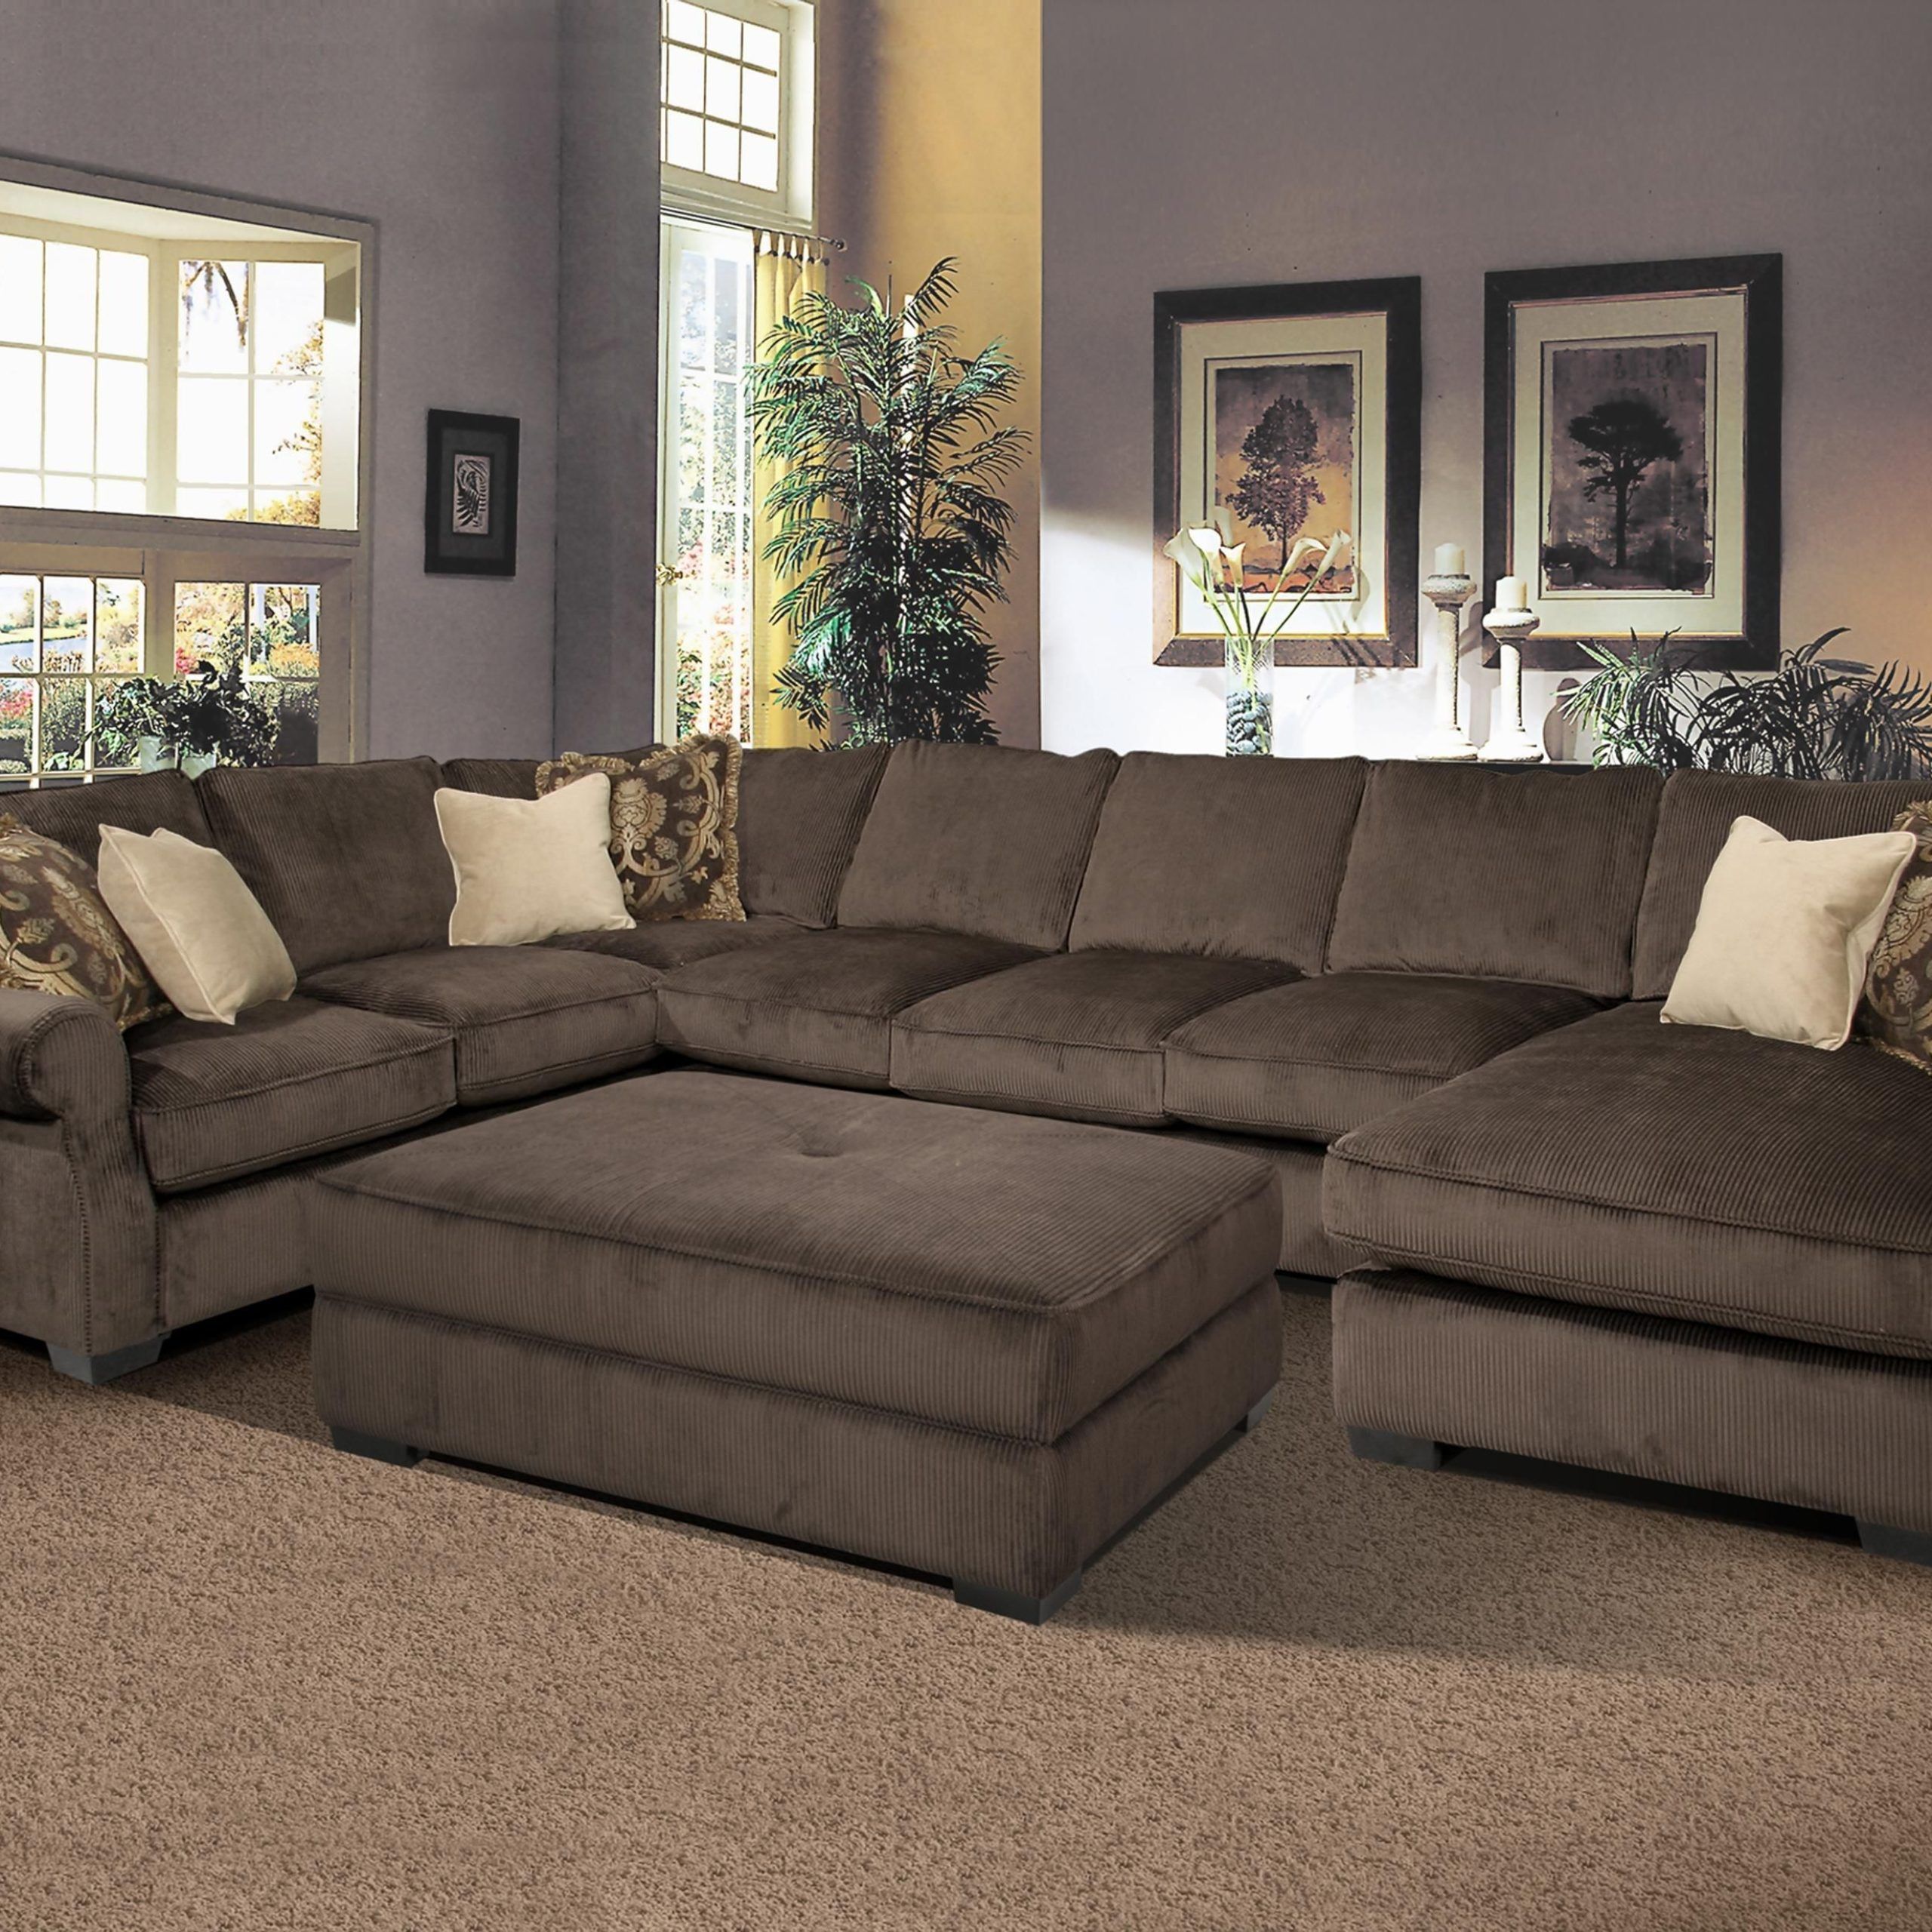 10 Collection Of Sectionals With Oversized Ottoman | Sofa Ideas Inside Sofas With Ottomans (Gallery 1 of 20)